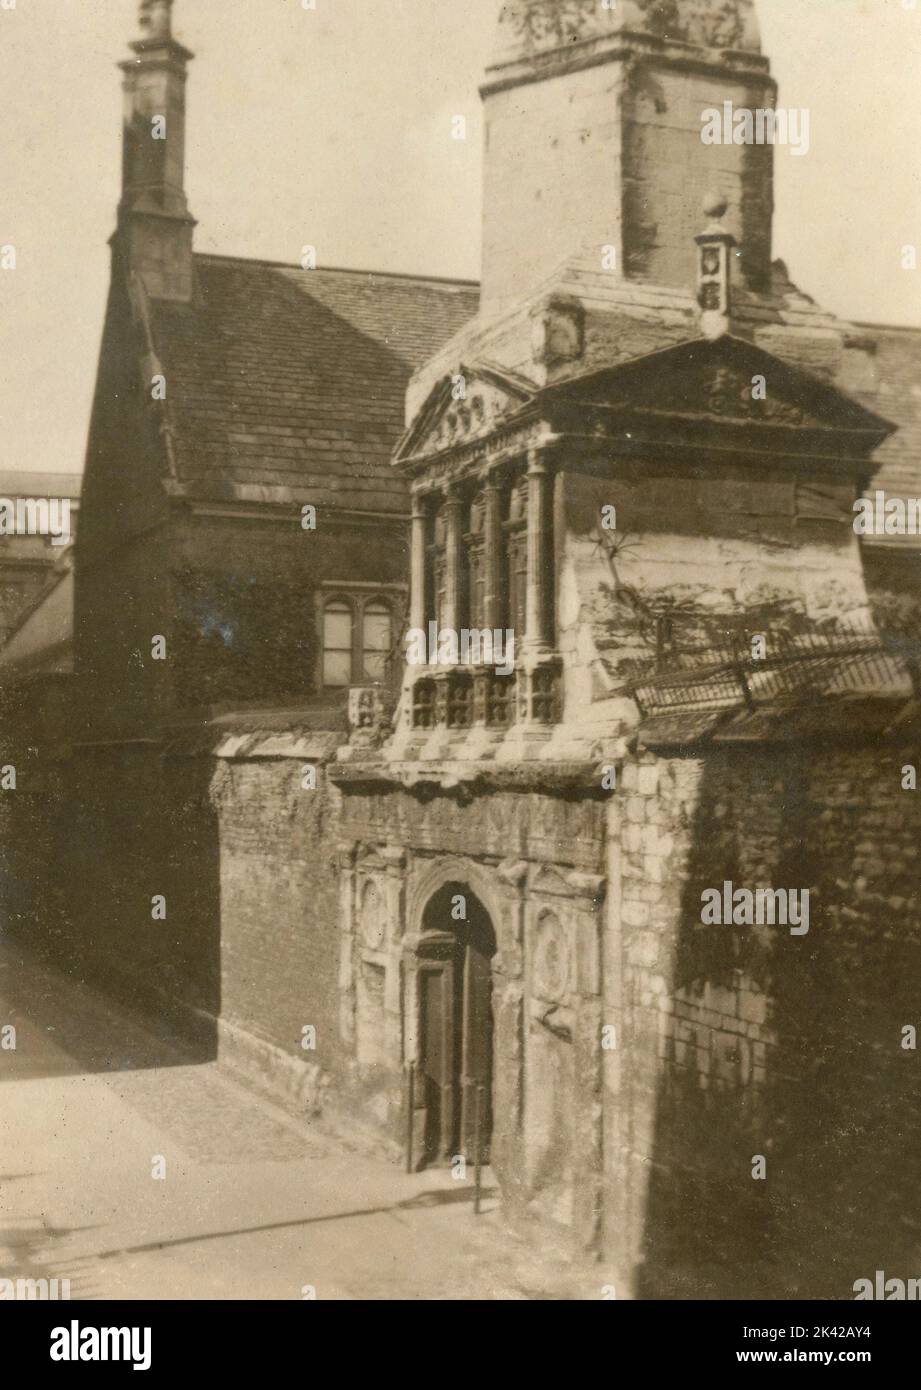 View of the Entry of Honour at Caius College, Cambridge, UK 1930s Stock Photo